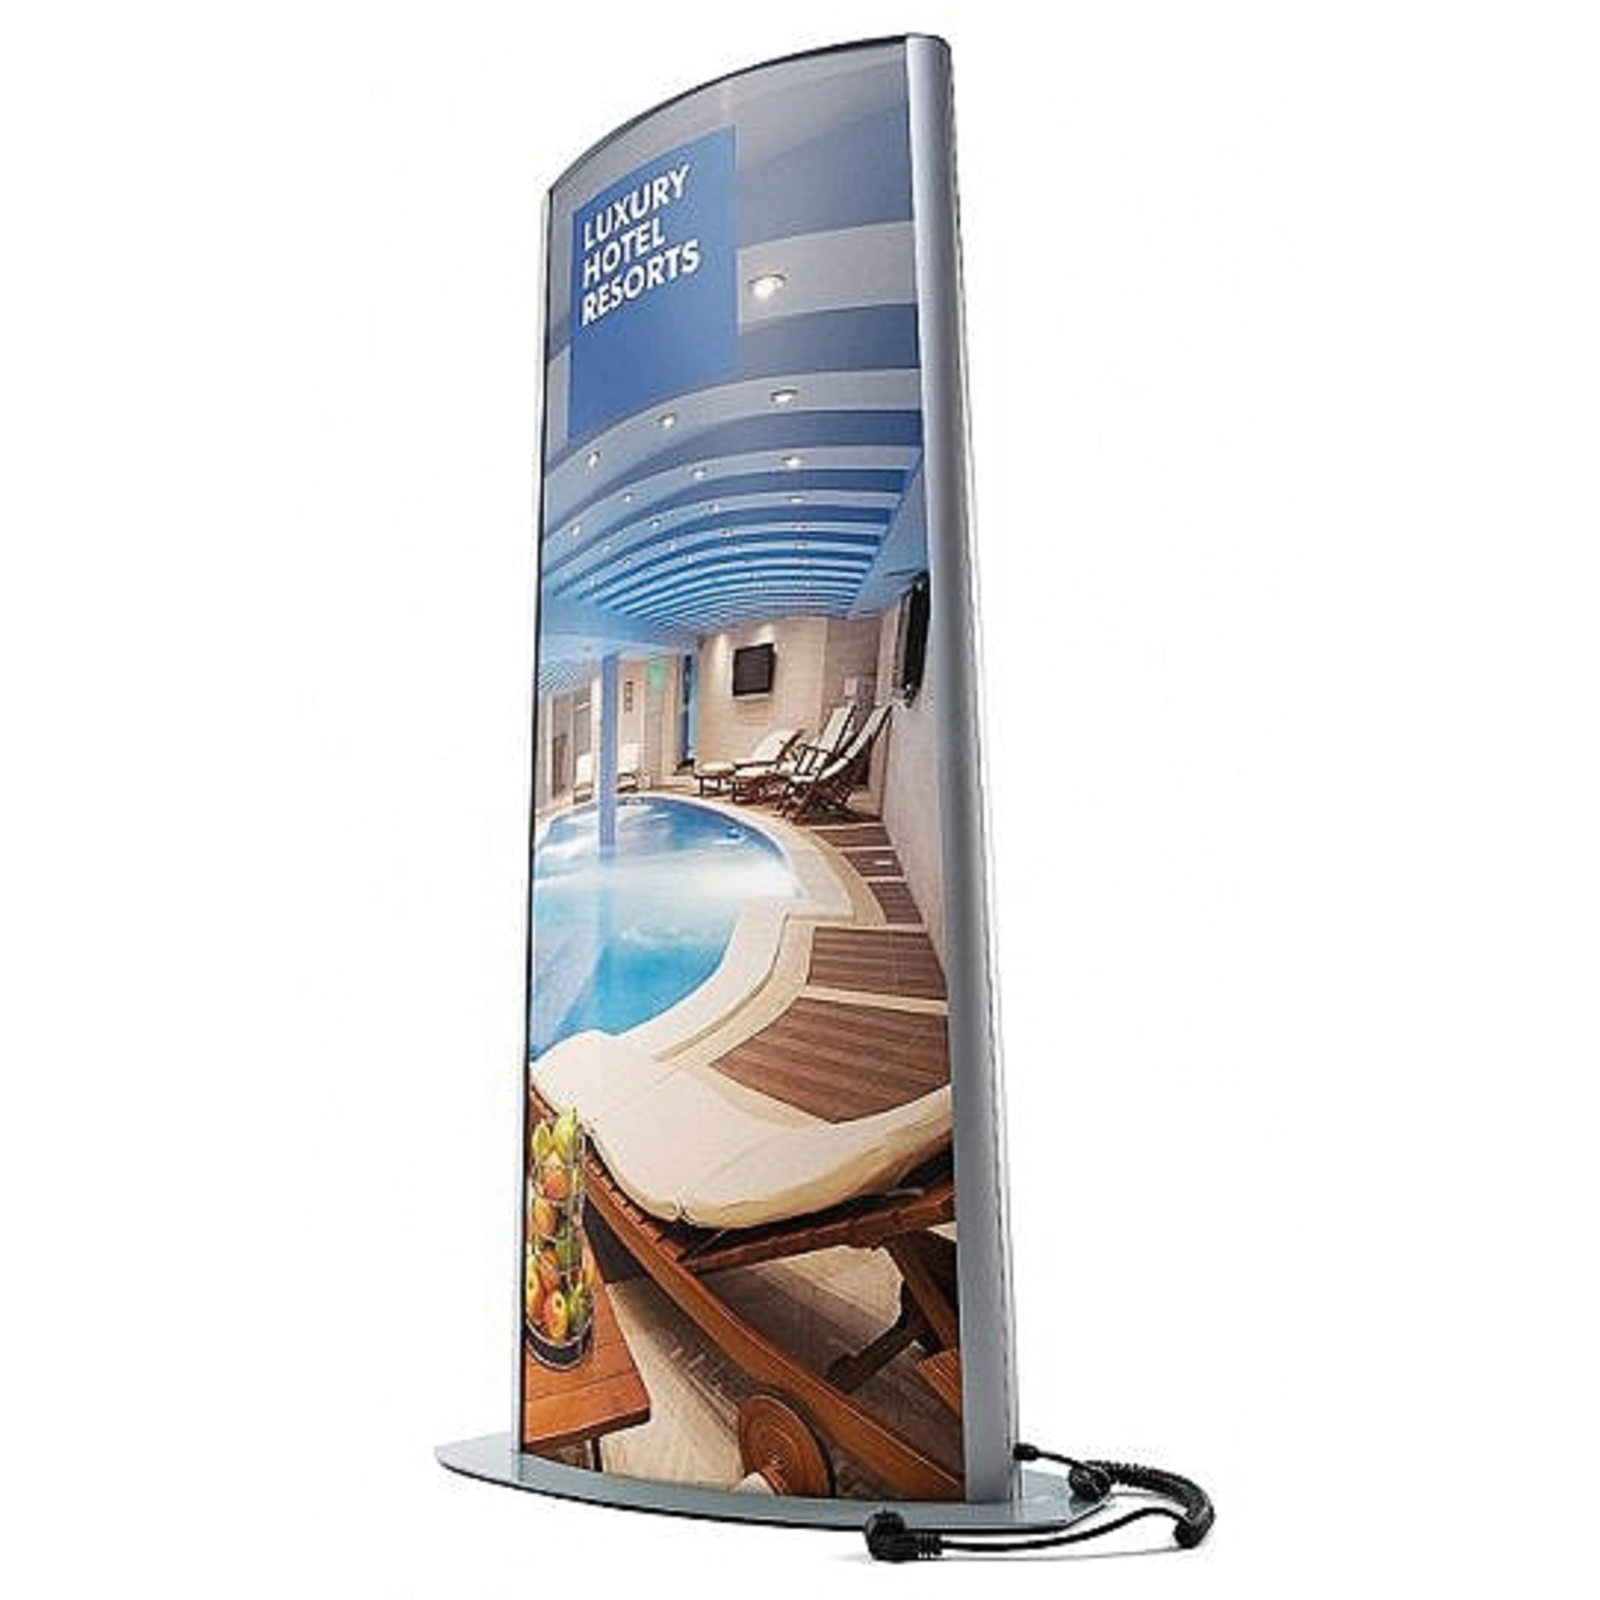 Double Sided Freestanding Illuminated Totem Poster Display